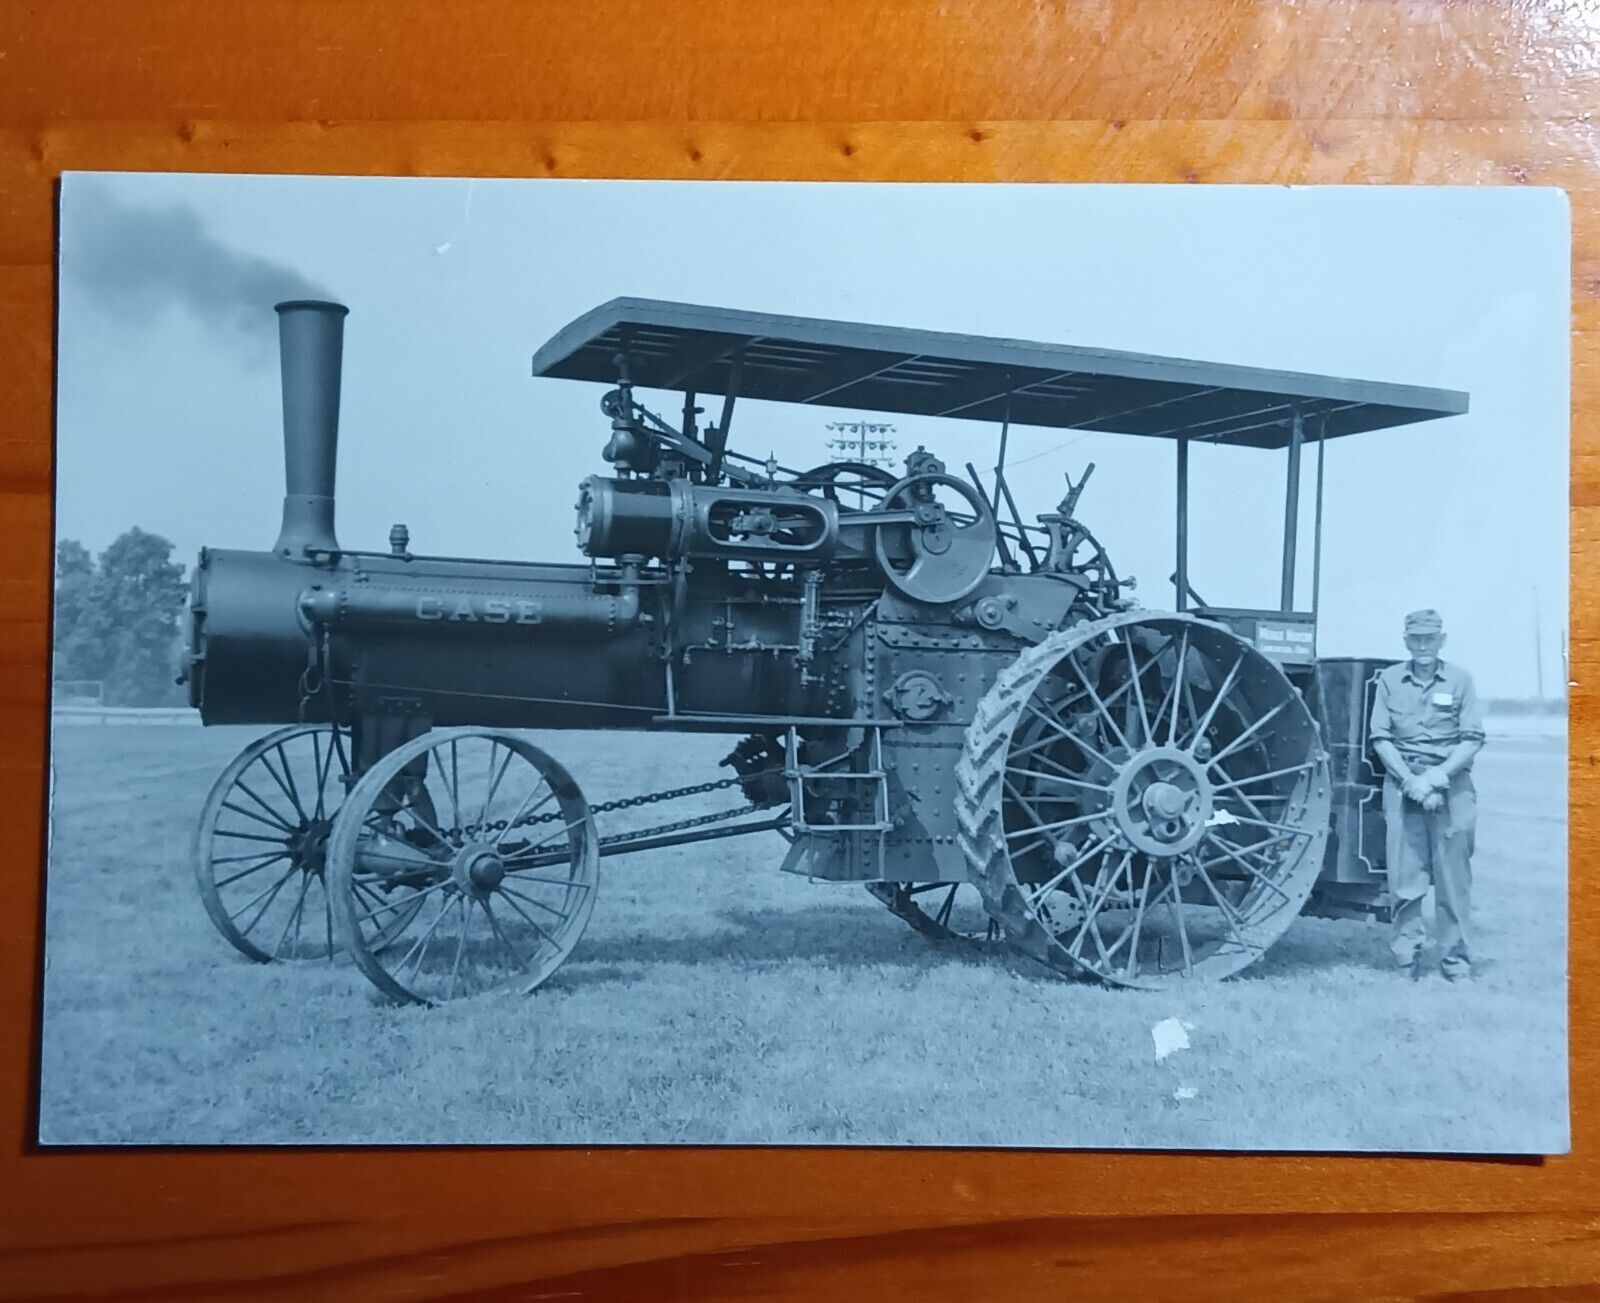 rppc of an ohio case steam tractor, standing beside the proud owner.